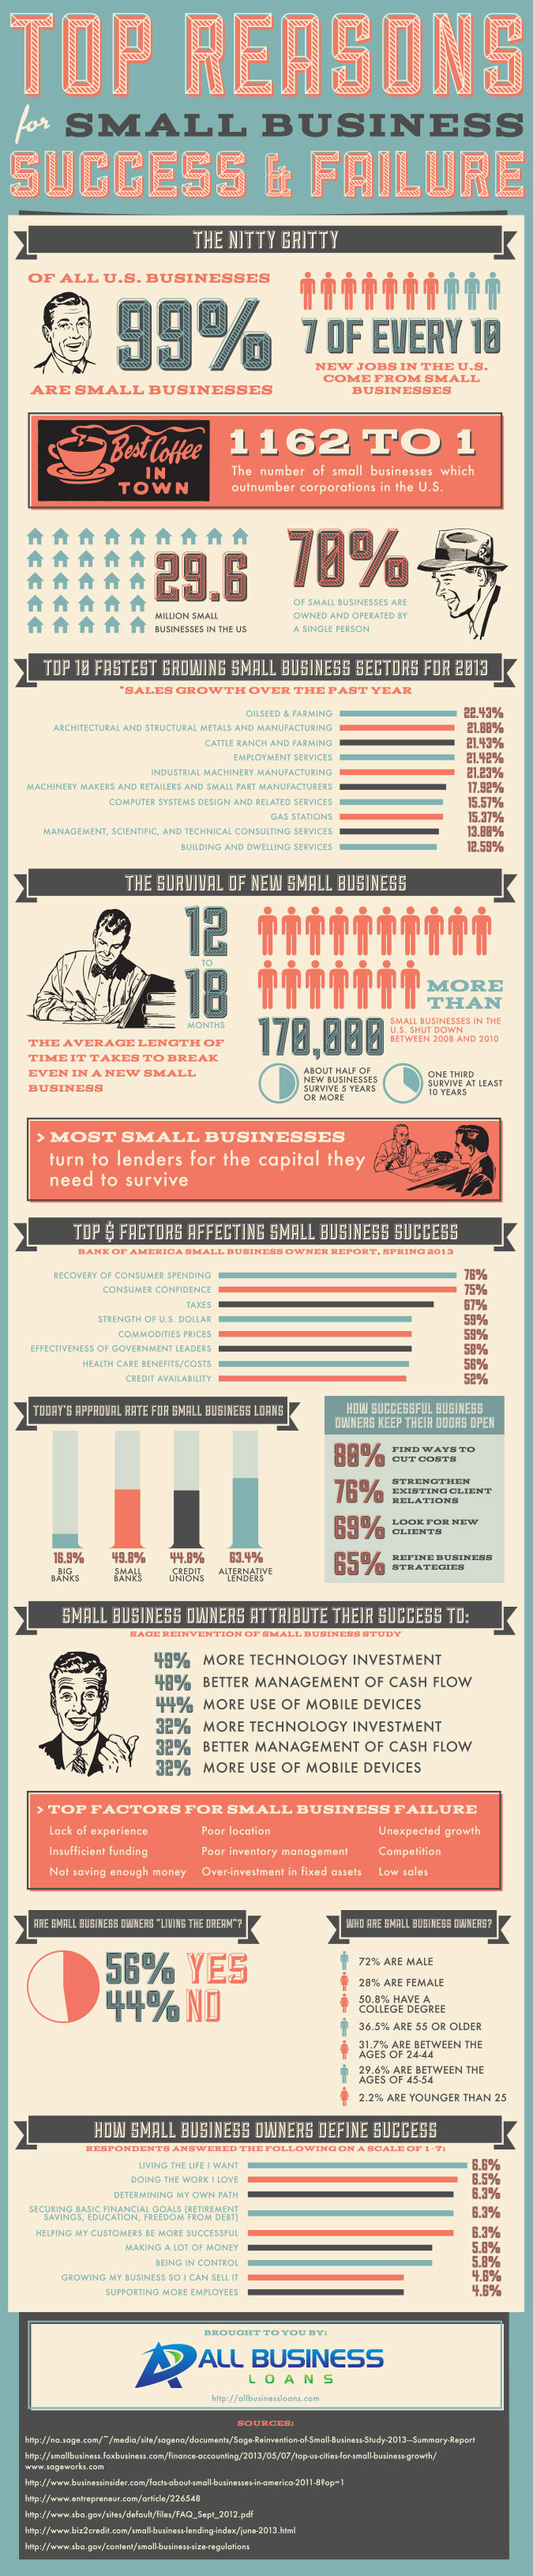 Top Reasons for Small Business Success and Failure